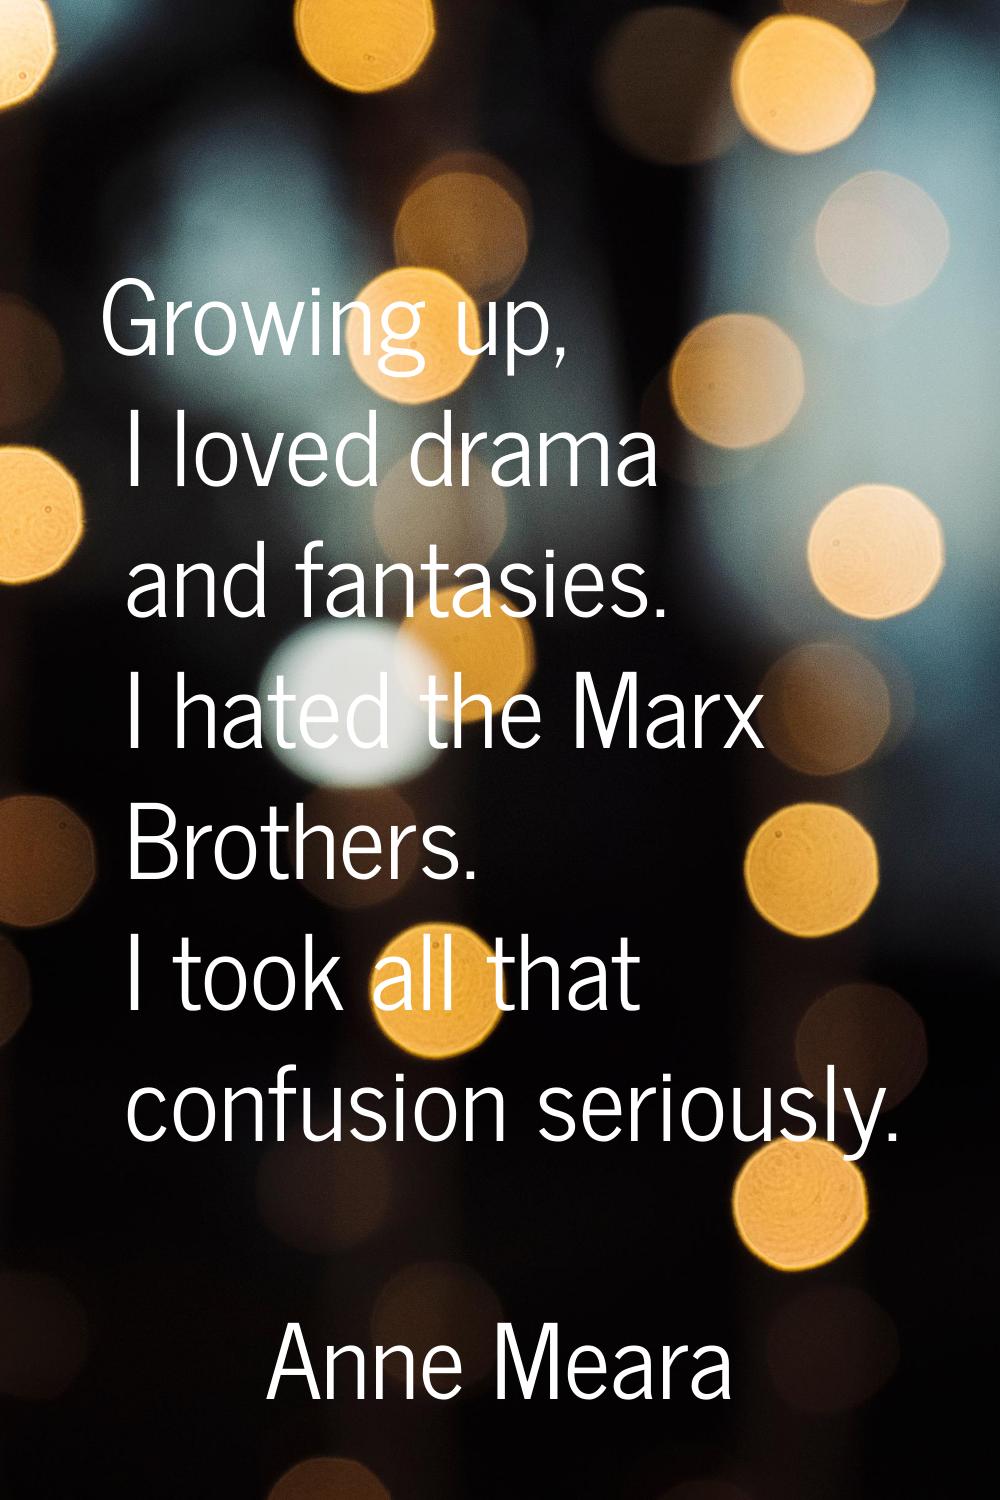 Growing up, I loved drama and fantasies. I hated the Marx Brothers. I took all that confusion serio